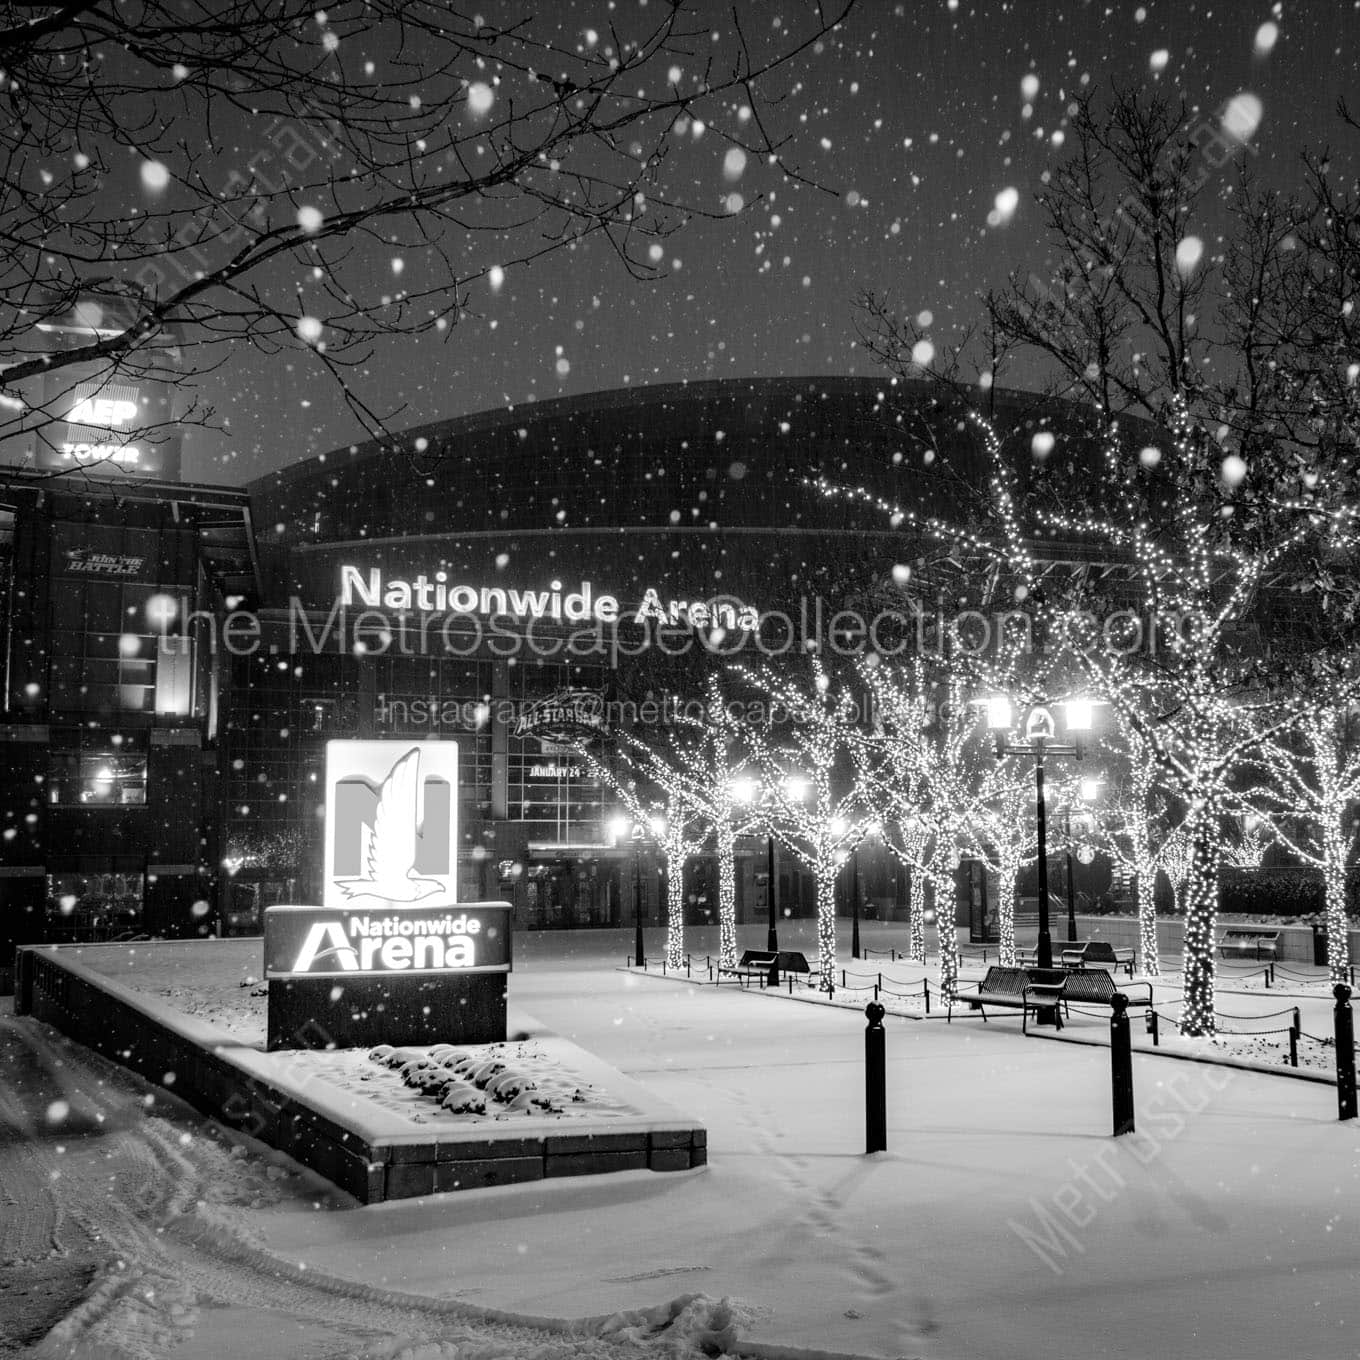 nationwide arena in snowfall at night Black & White Office Art